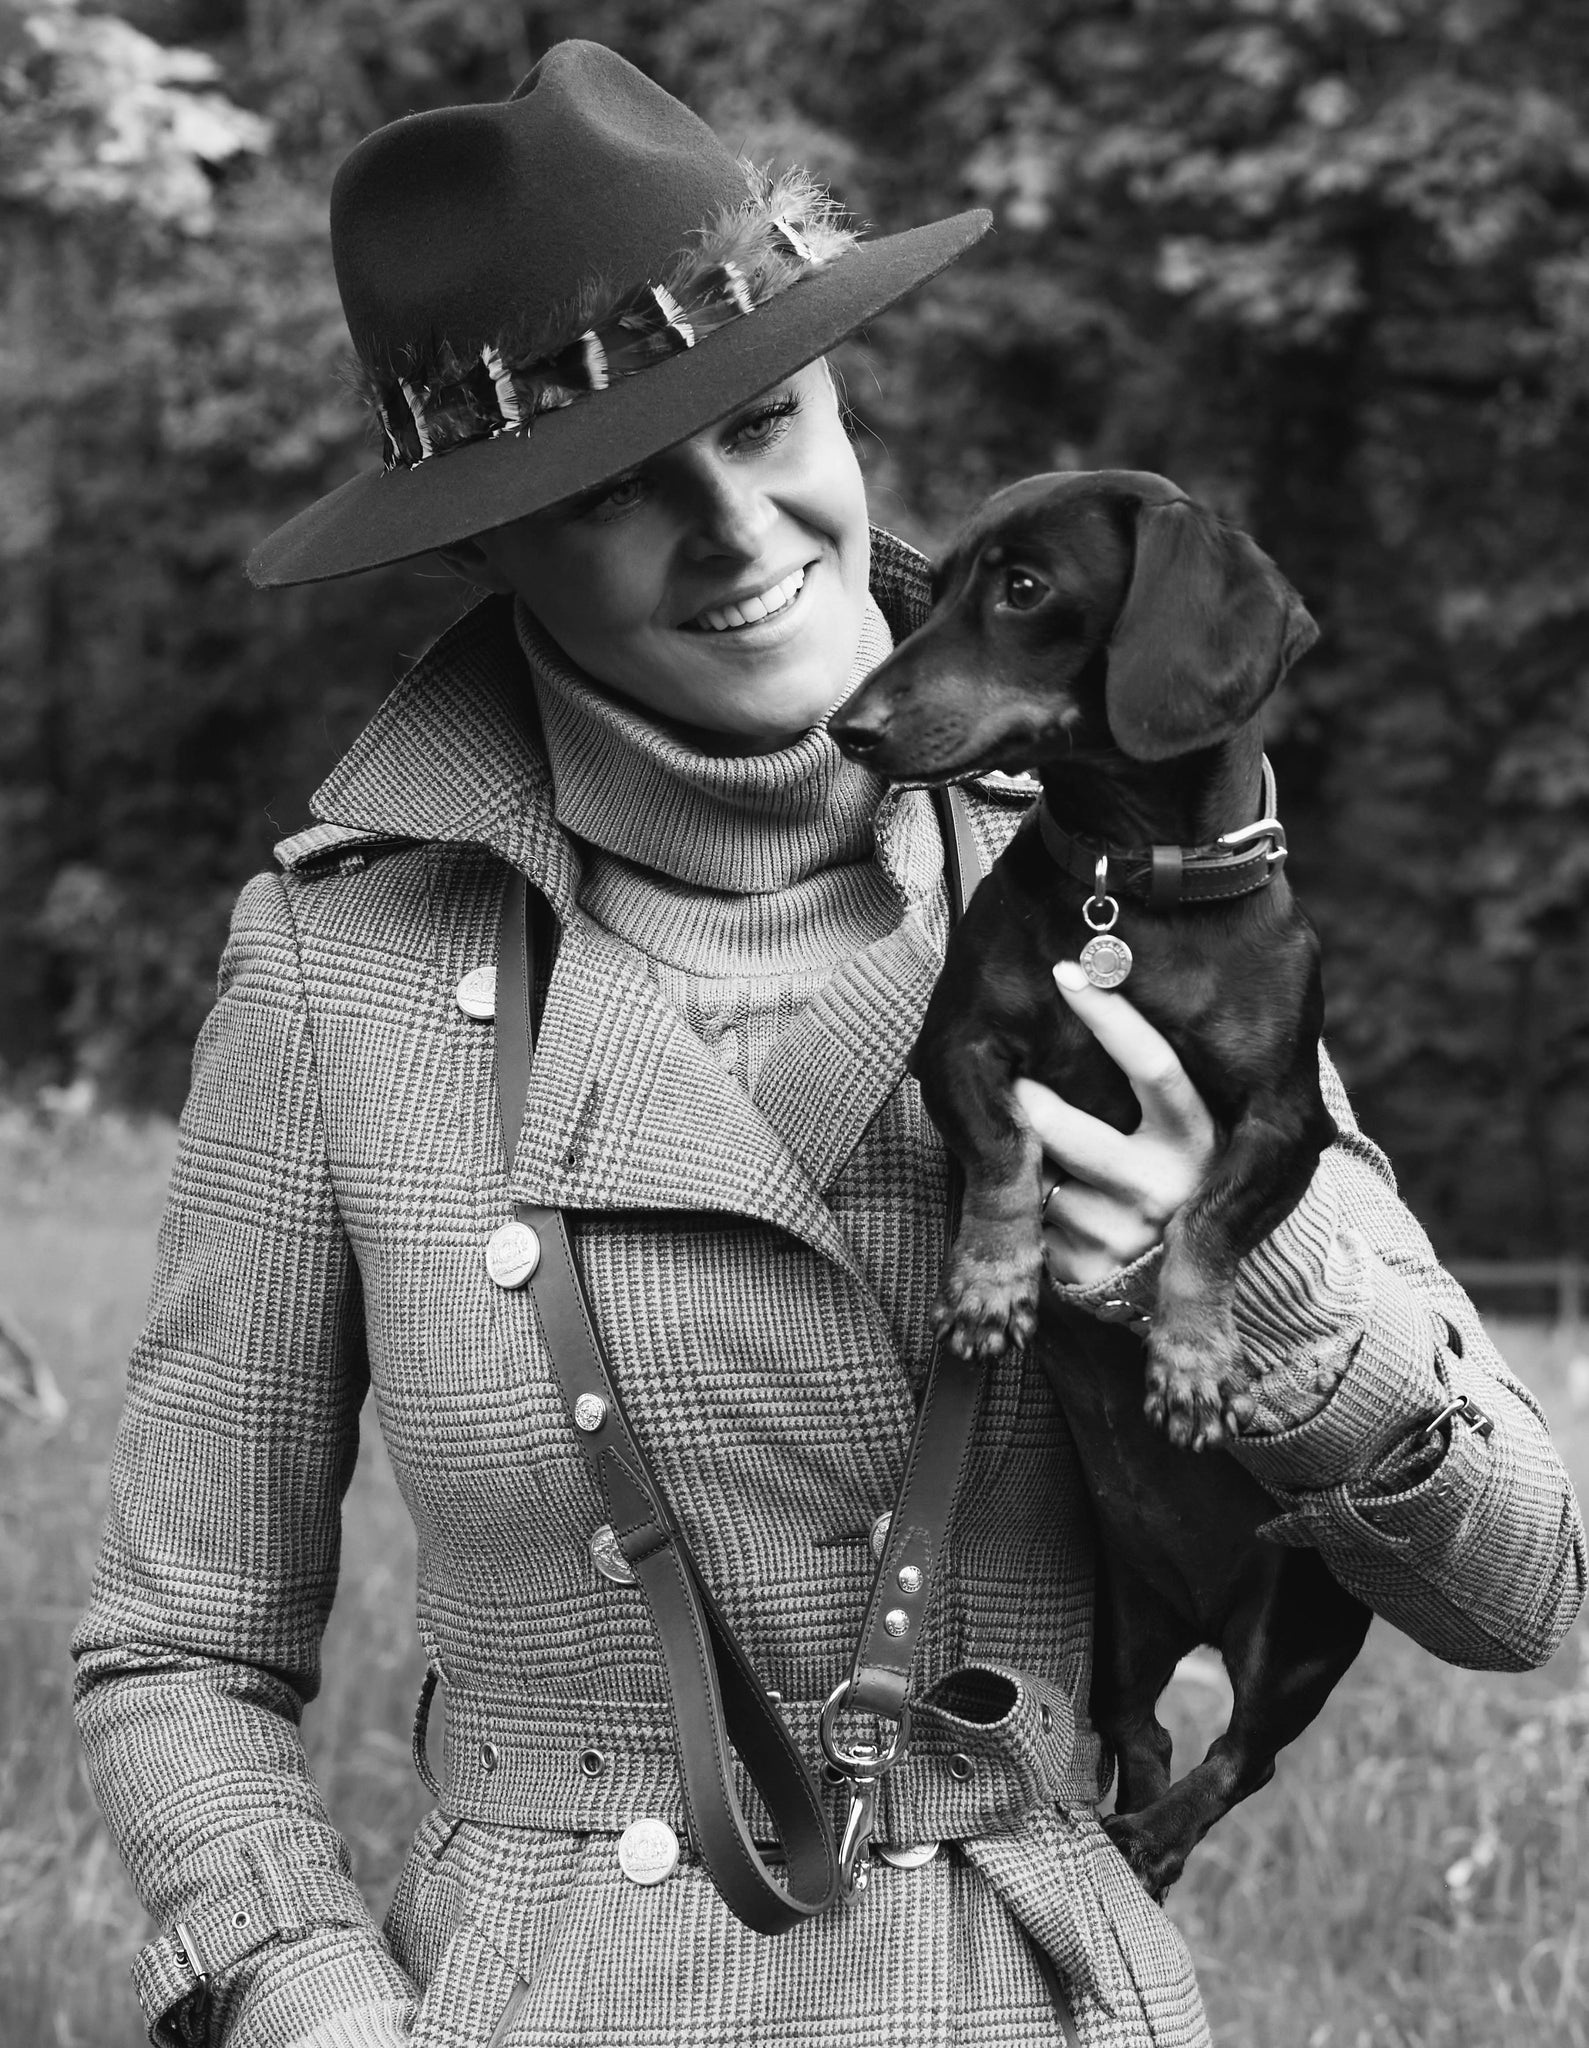 Jade Holland Cooper, owner of Holland Cooper wearing trilby hat, tweed trench coat with leather dog lead around neck holding miniature dachshund